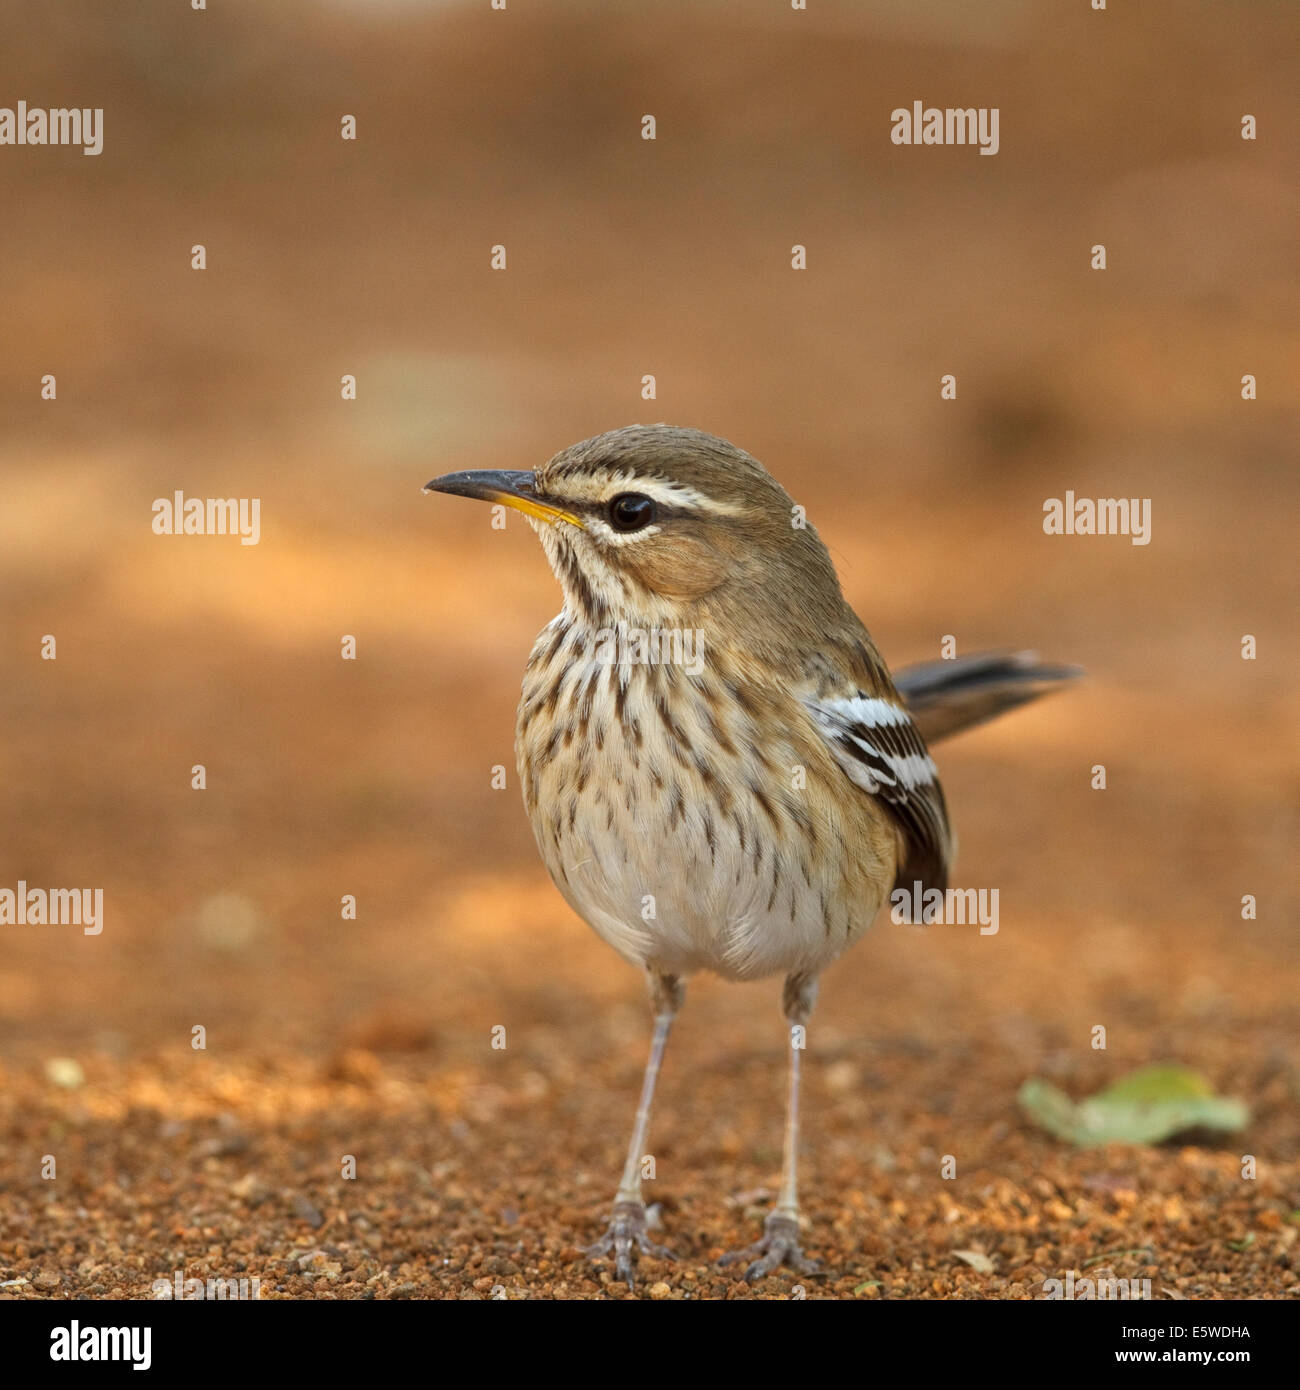 Red-backed Scrub-Robin = White-browed Scrub Robin (Cercotrichas leucophrys sp. leucophrys) on the ground Stock Photo